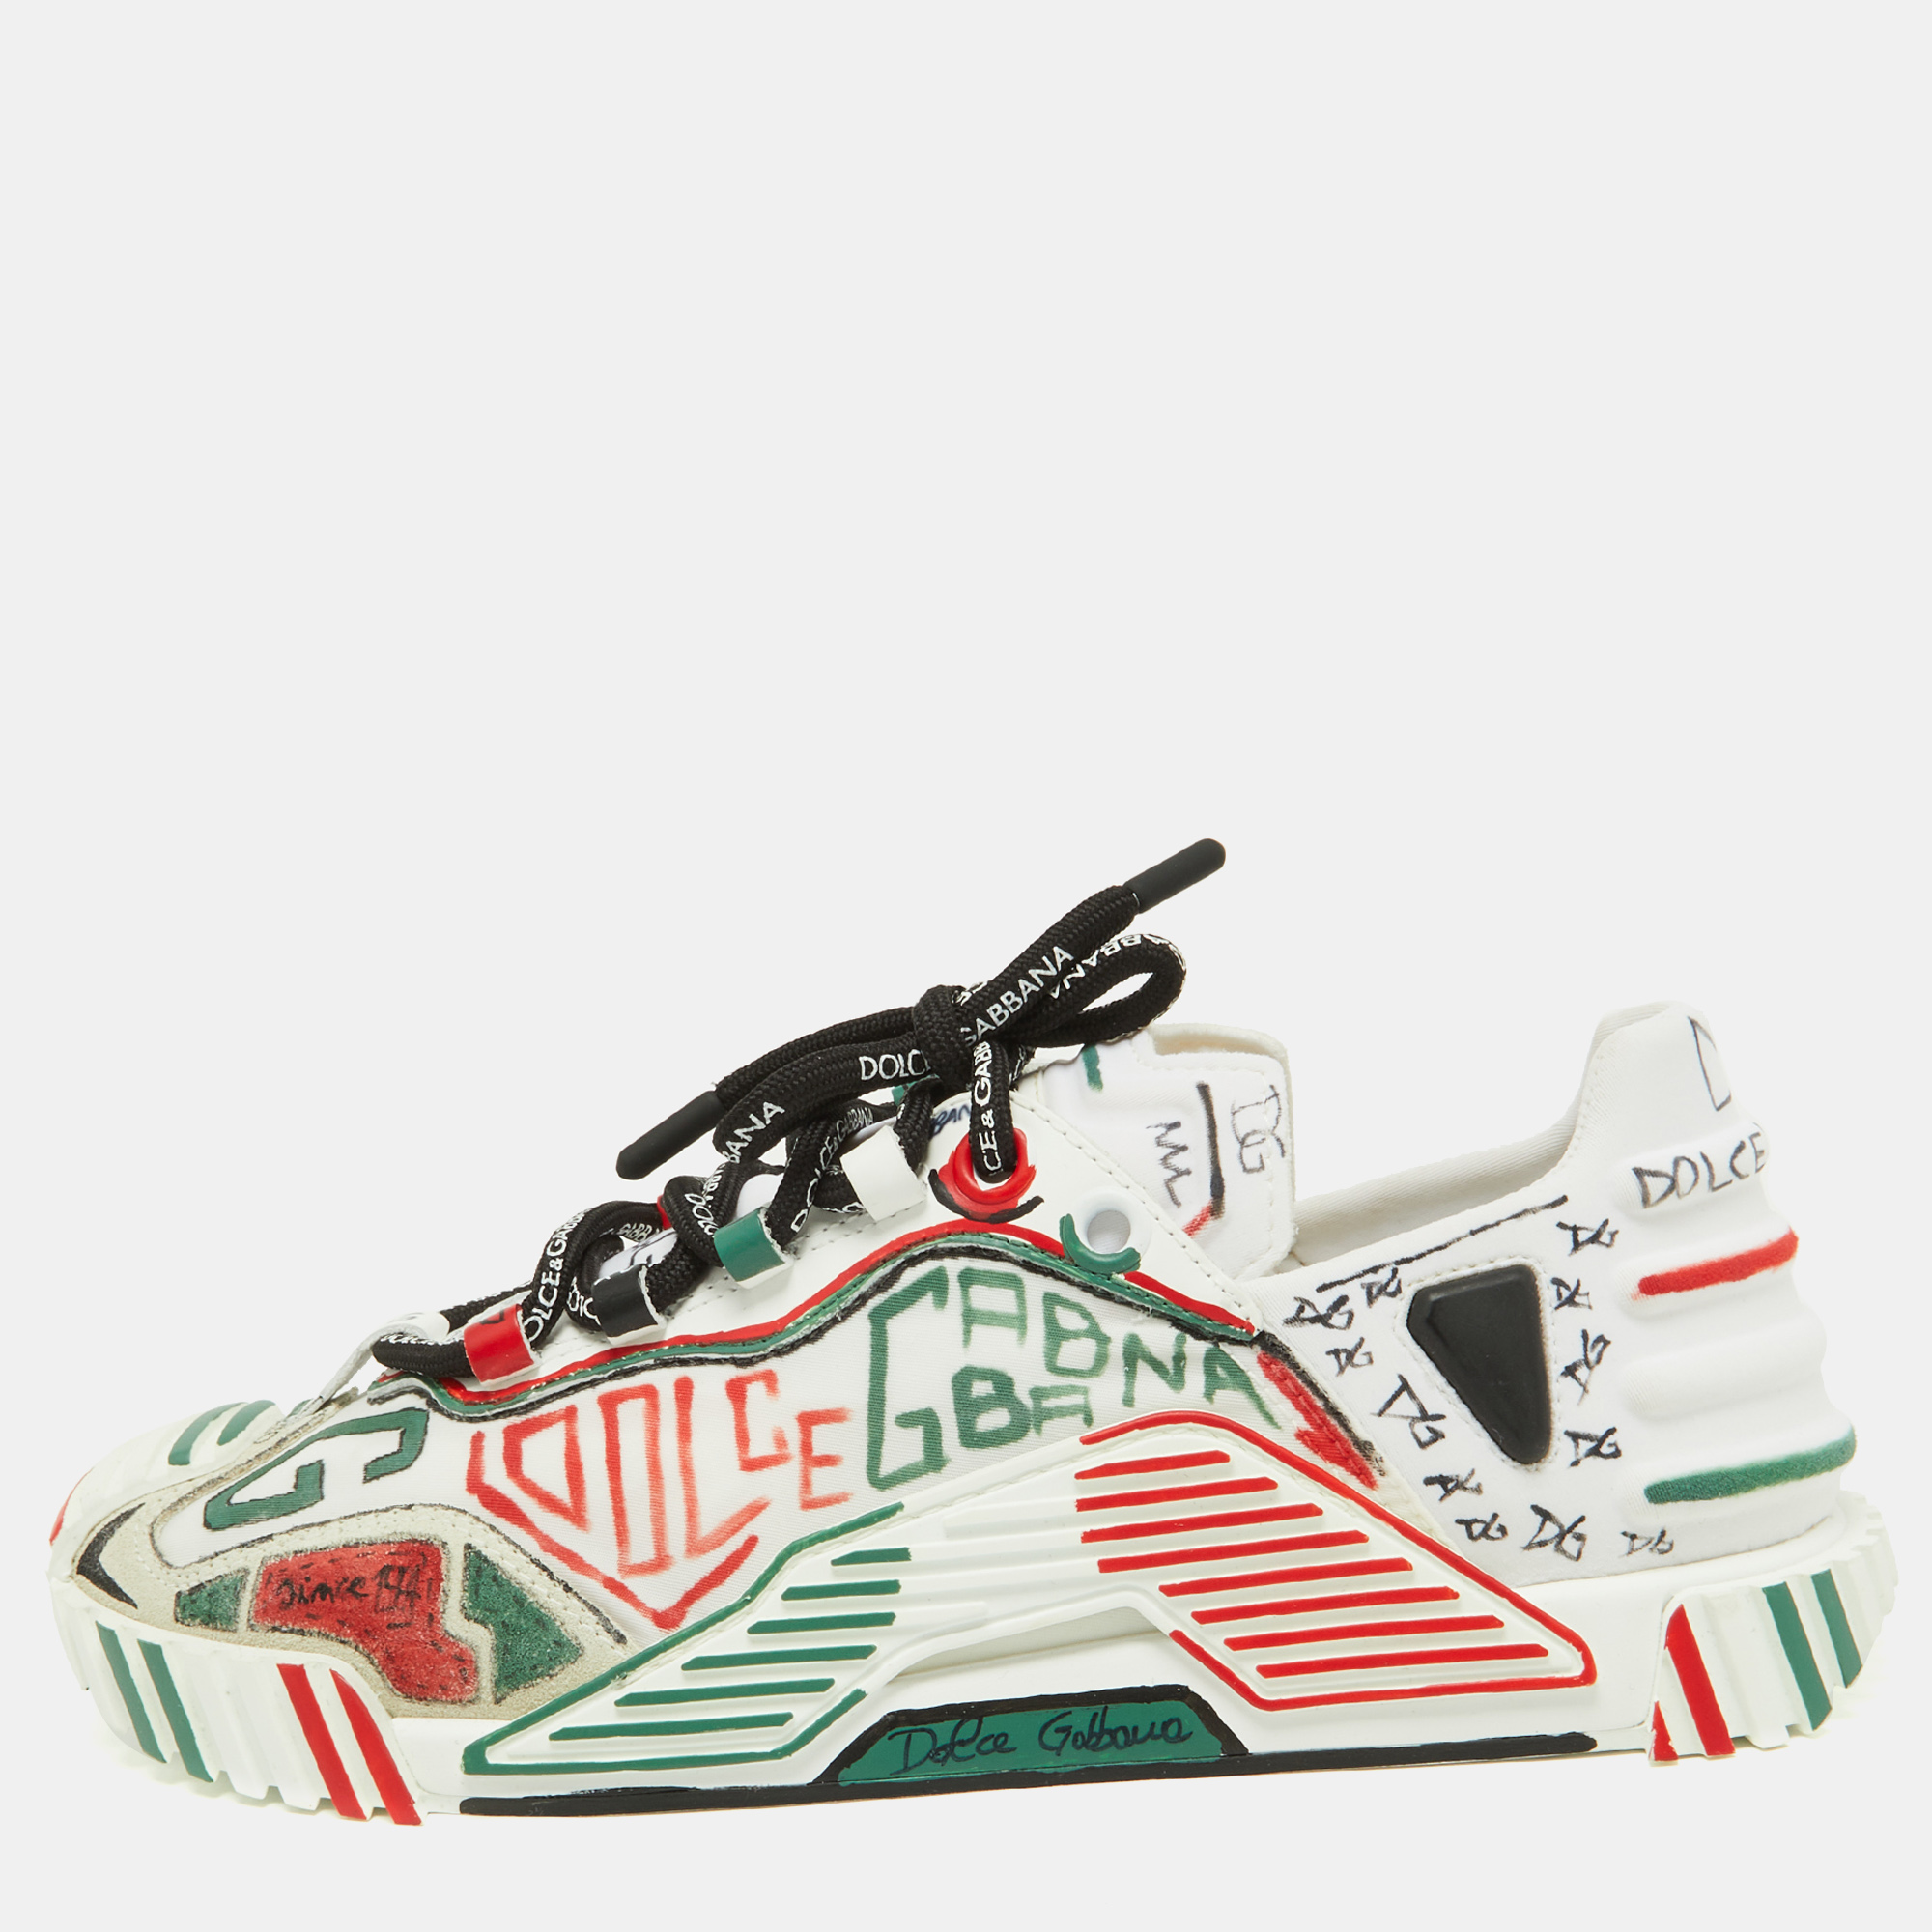 

Dolce & Gabbana Multicolor Neoprene and Suede Miami Ns1 Low Top Sneakers Size